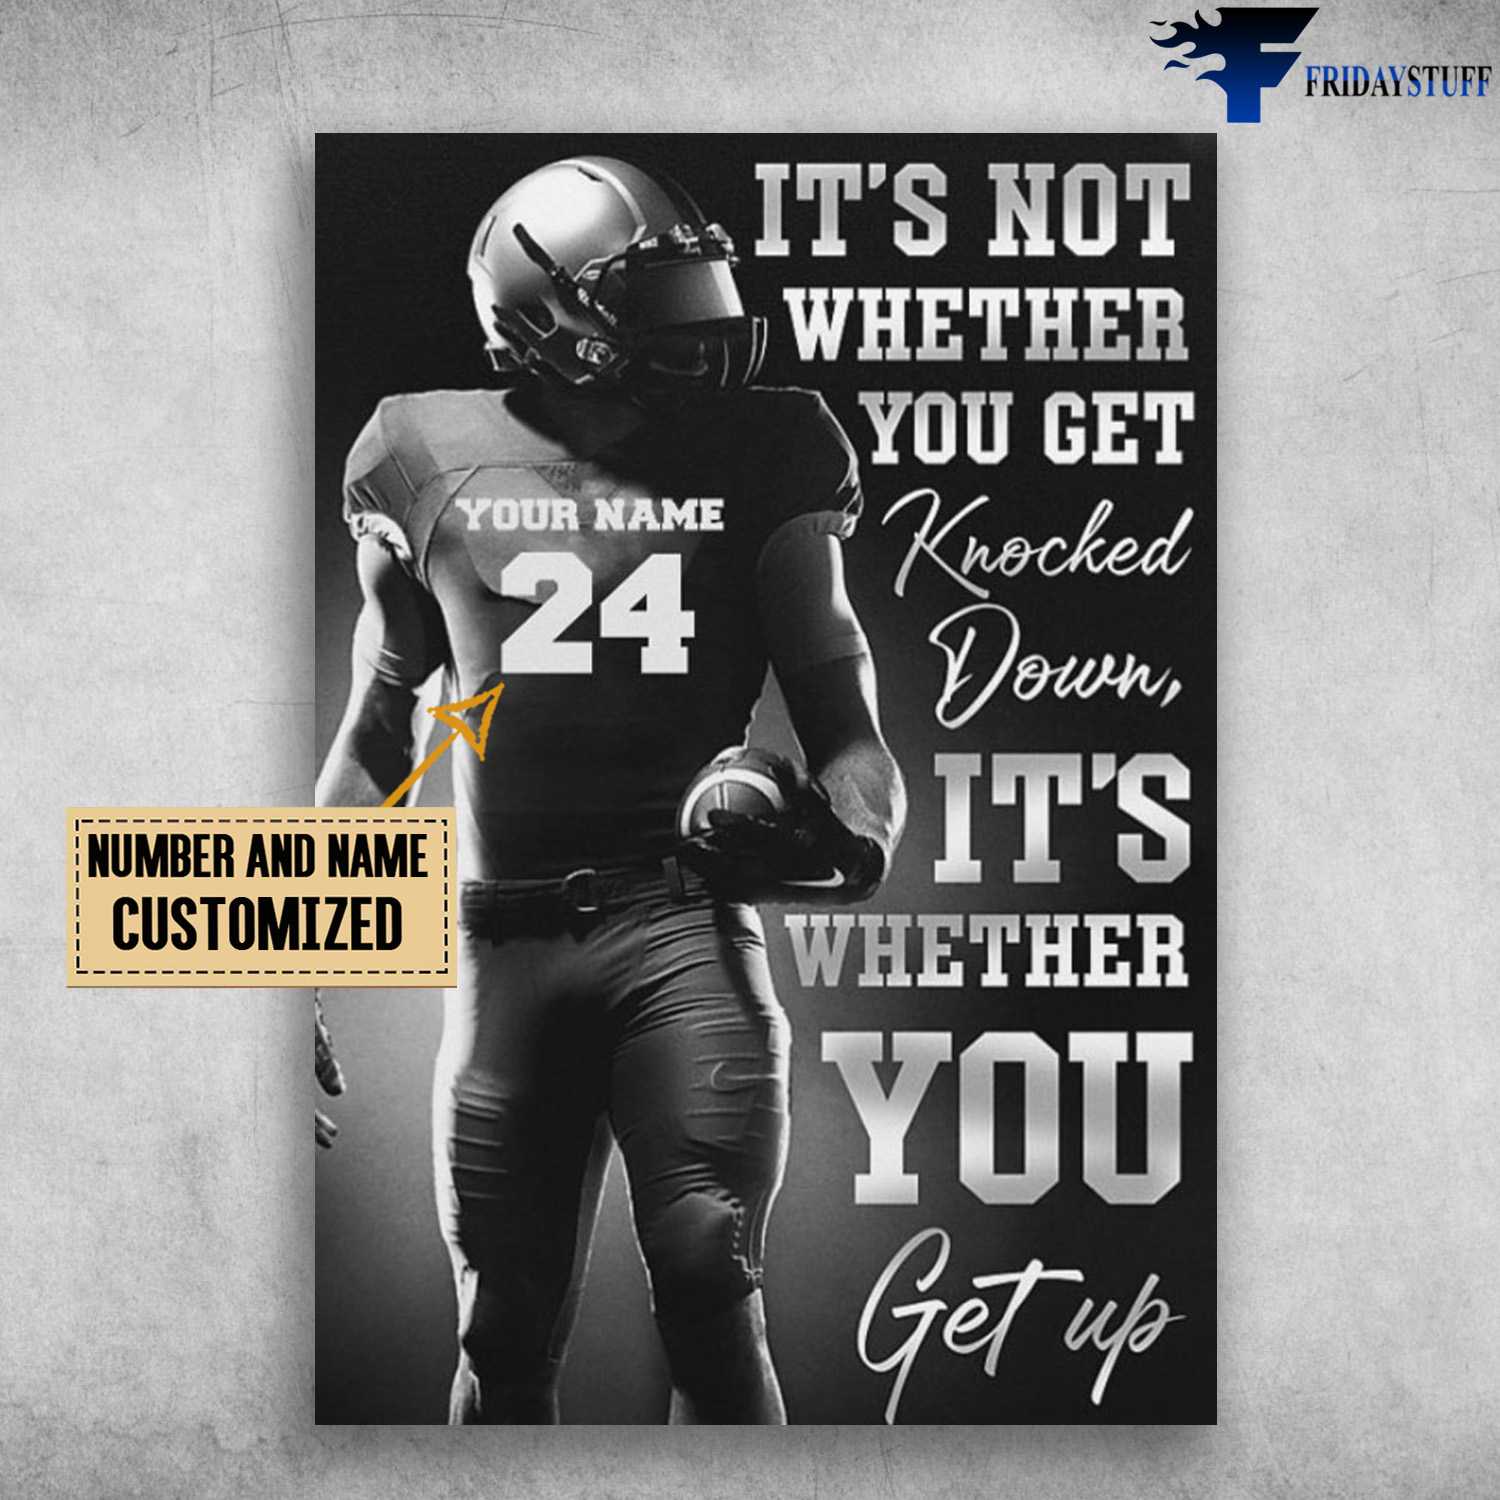 Football Player, Football Poster, It's Not Whether You Get Knocked Down, It's Whether You Get Up